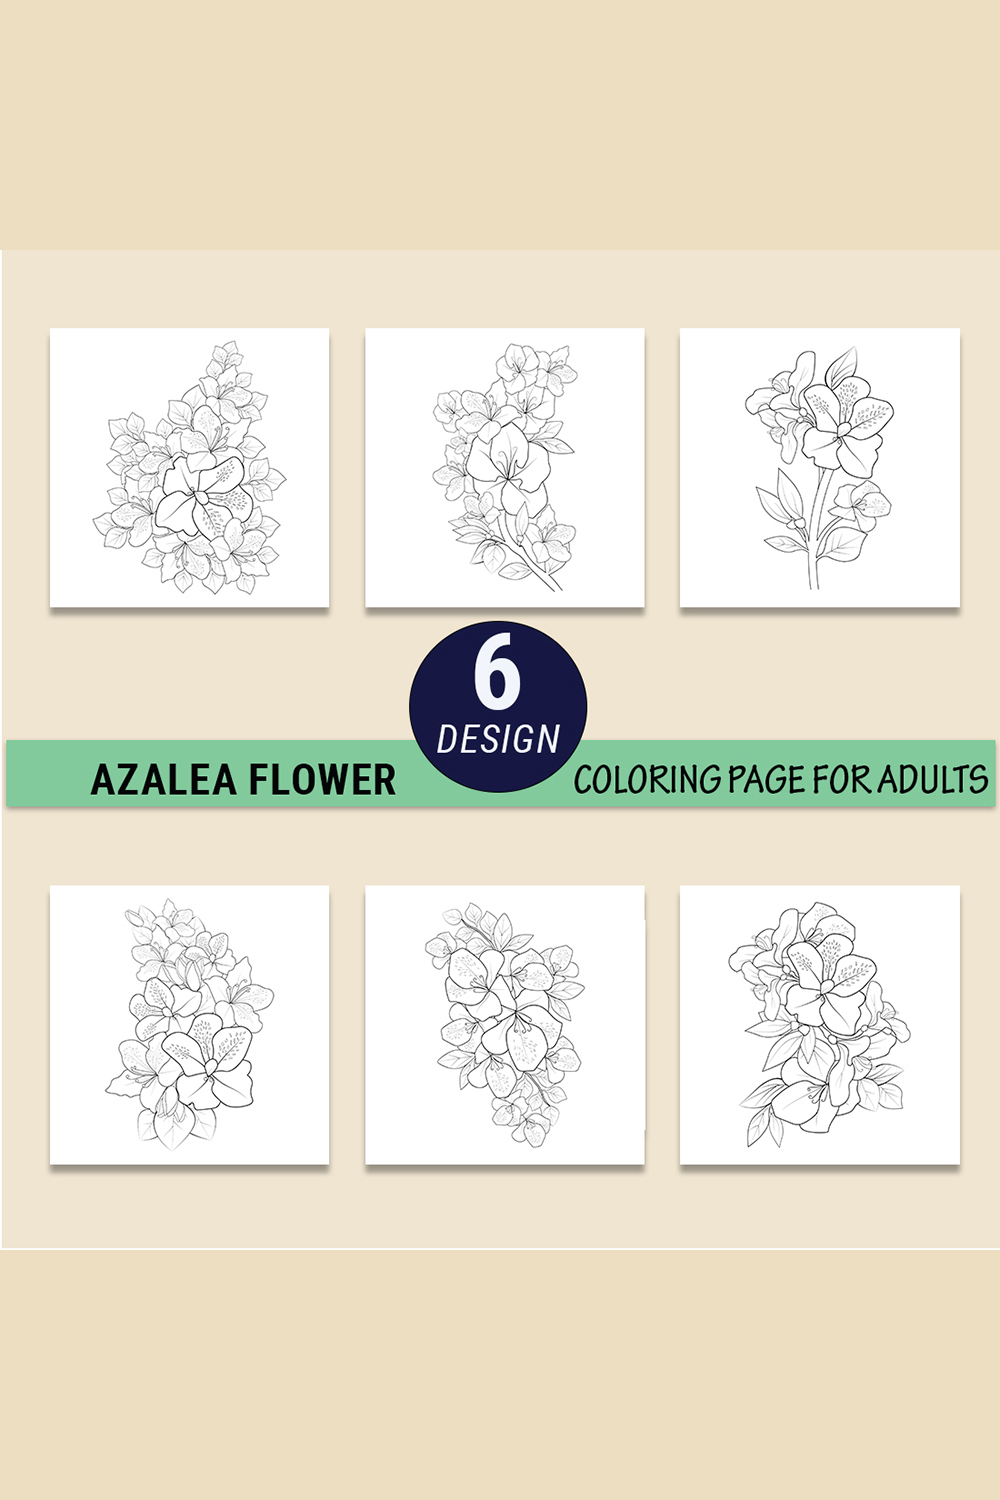 outline azalea drawing, botanical azalea drawing, the national flower of Nepal drawing, rhododendron sketch pinterest preview image.